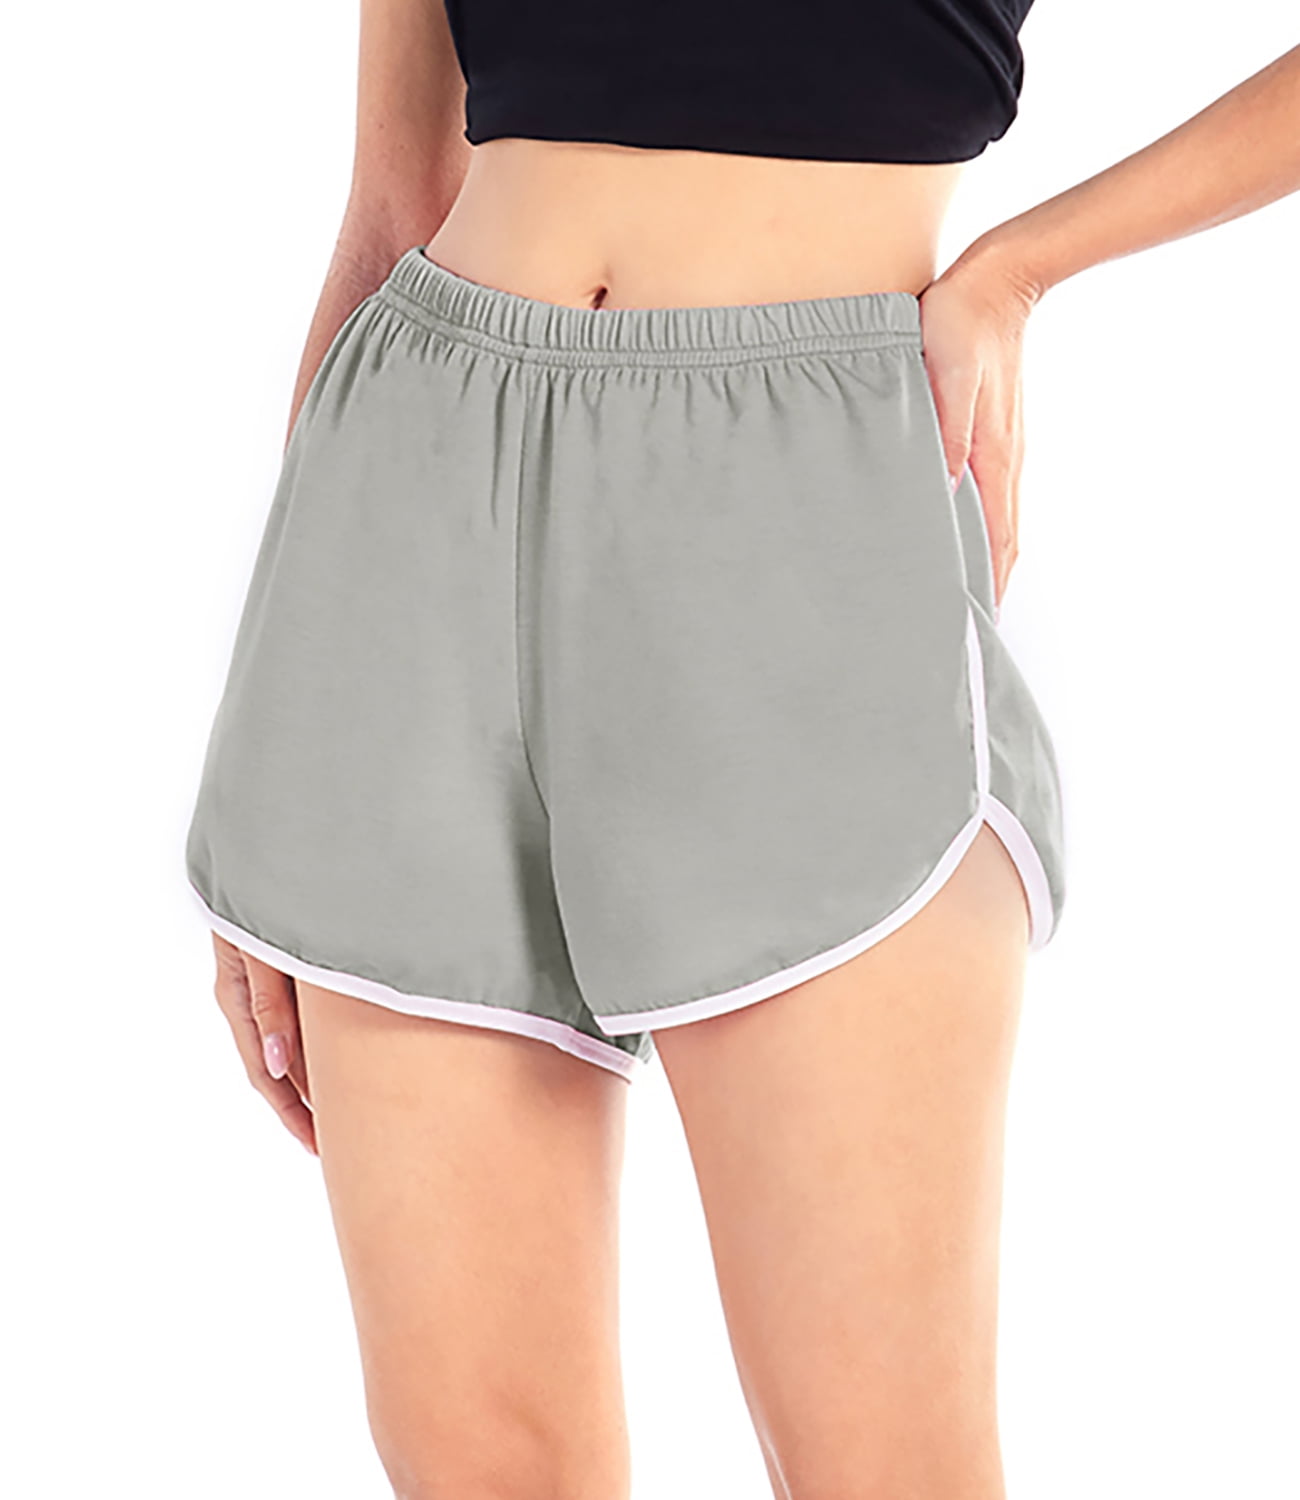 Teen Girls High Elastic Waist Workout Sports Track Shorts,Running Shorts  Athletic Gym Yoga PE Shorts,Super Comfy Casual Sporty Lounge Short Pants